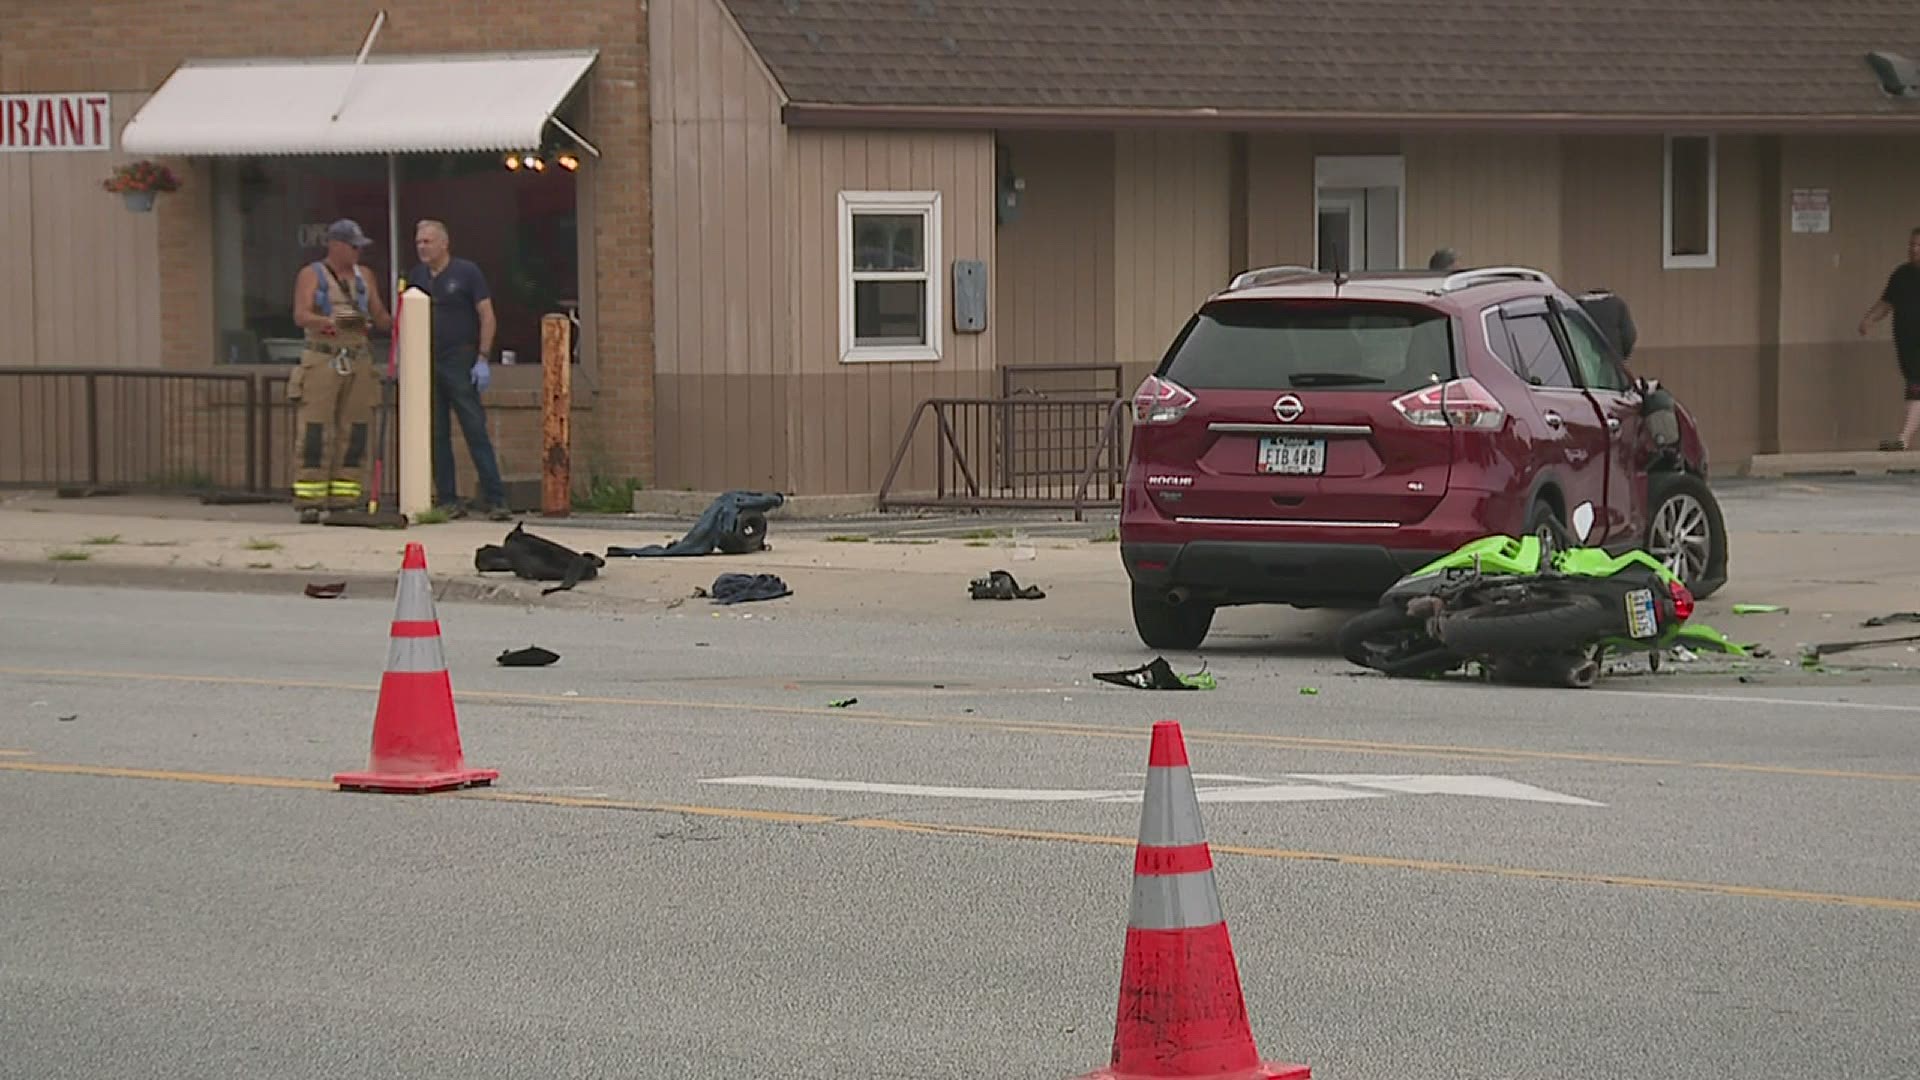 A motorcyclist died after colliding with a compact SUV on State Street in Riverdale, right along the border of Bettendorf.